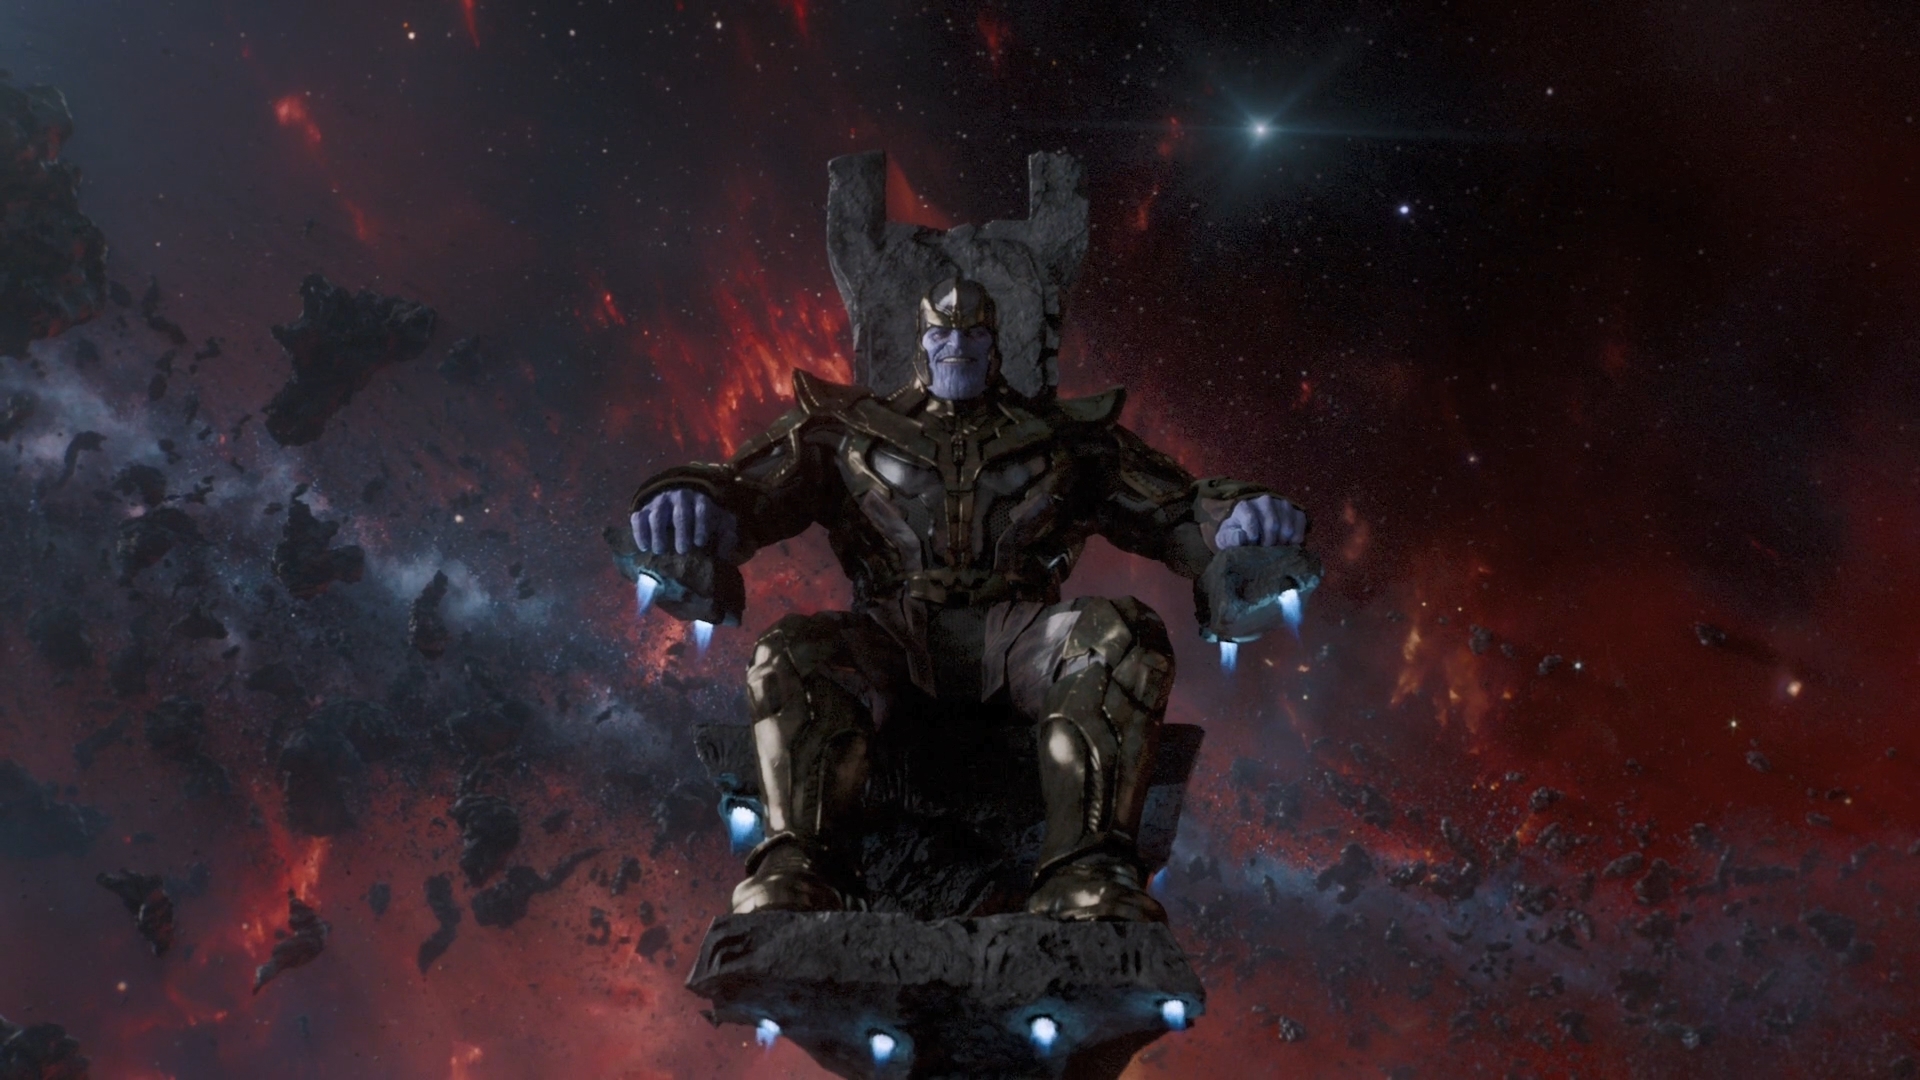 General 1920x1080 Thanos IMAX Marvel Comics Marvel Cinematic Universe space movies science fiction armored armor smiling CGI Guardians of the Galaxy Movie Screenshots villain villains